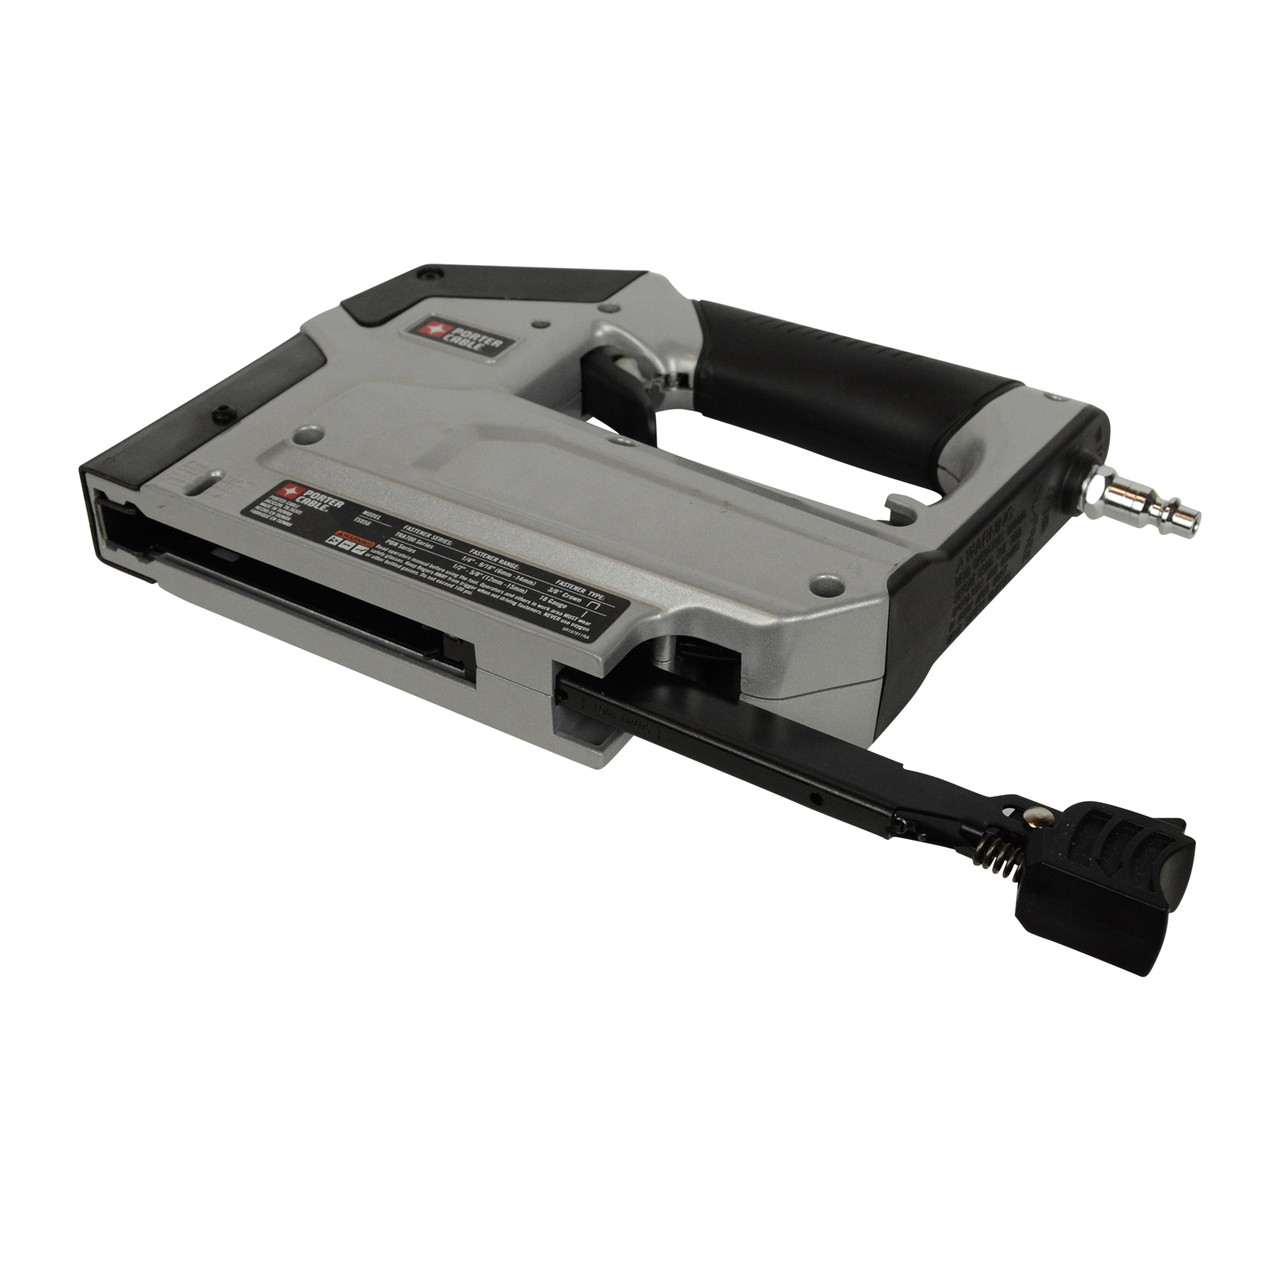 Porter Cable Ts056 Heavy Duty 3/8 in. Crown Stapler